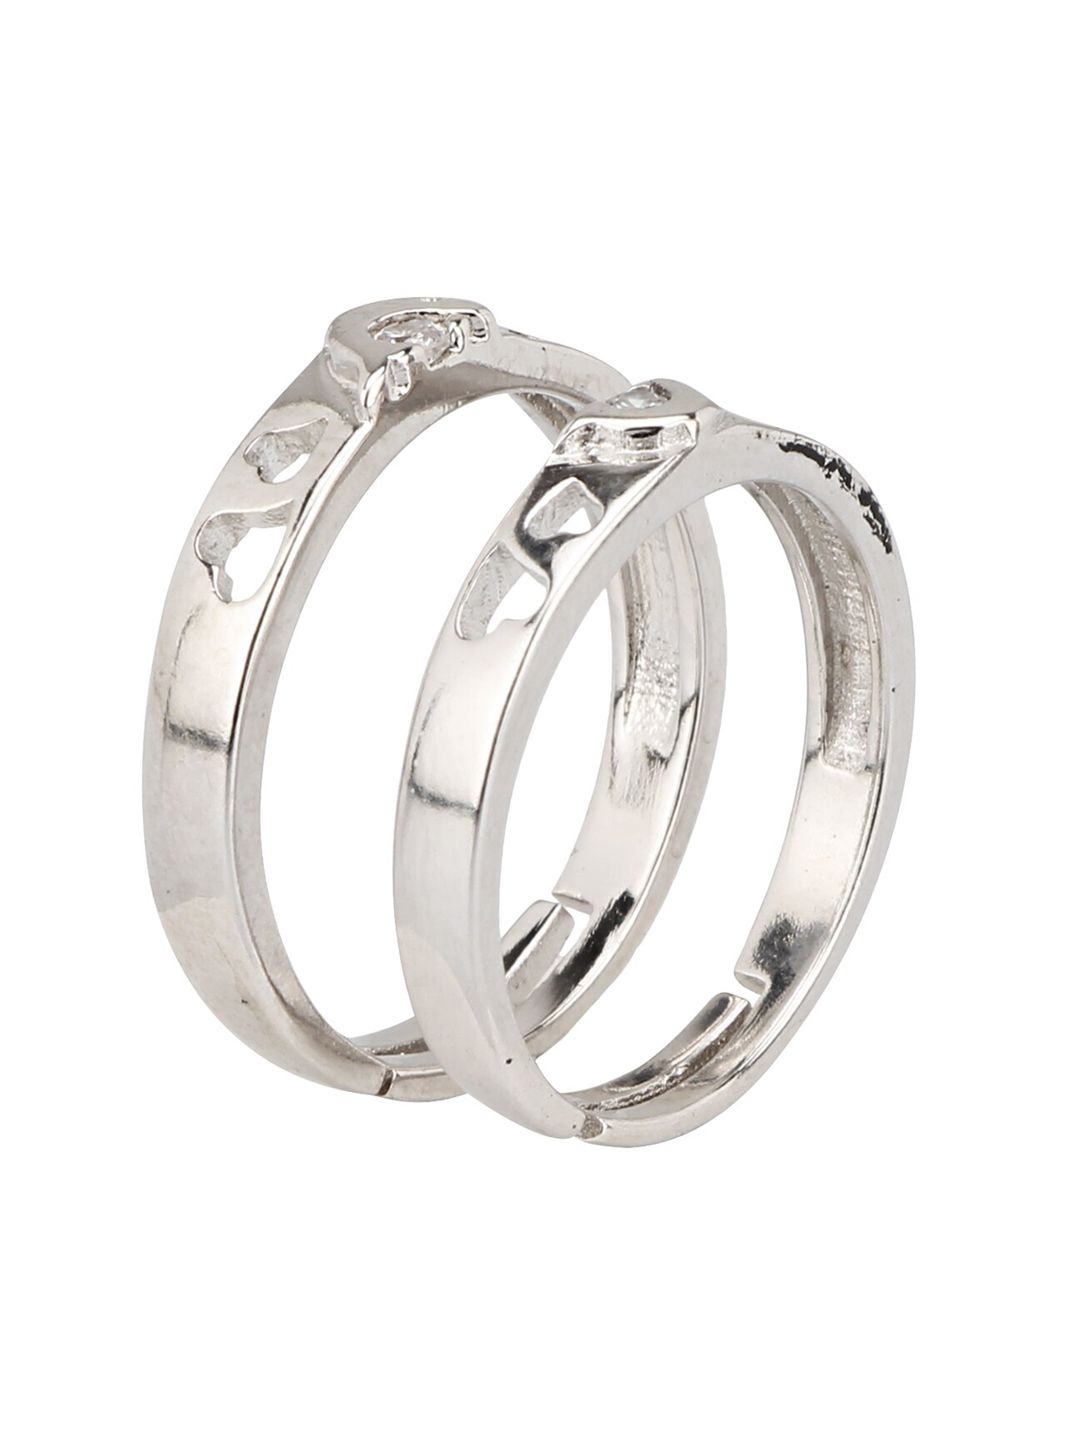 Arendelle Set Of 2 Silver-Plated Couple Adjustable Finger Rings Price in India